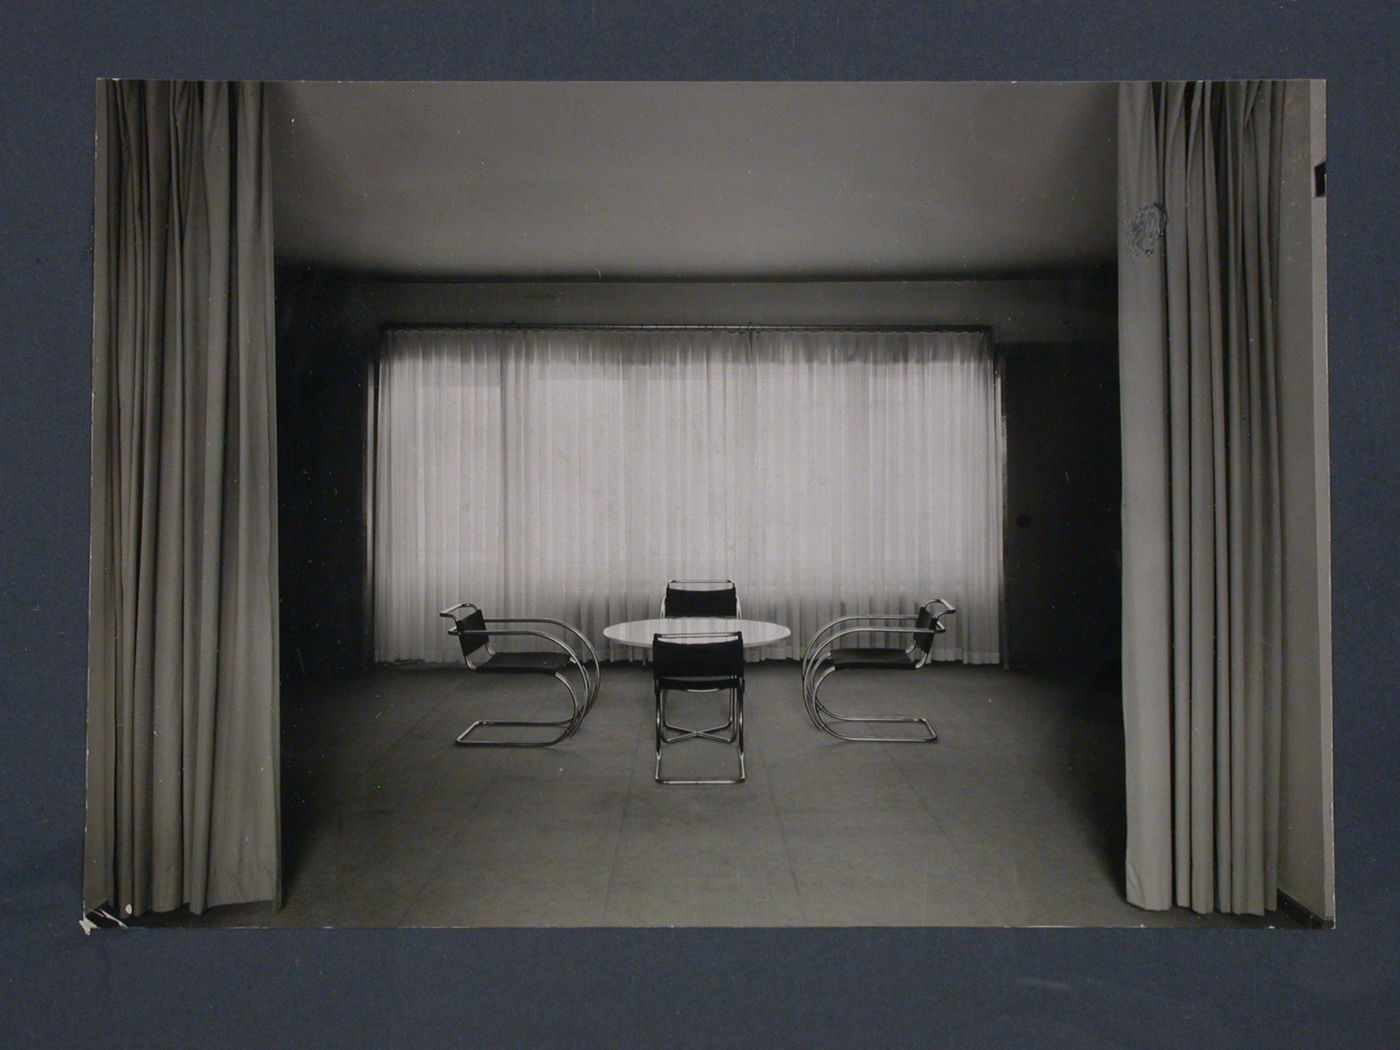 Interior view of a curtained room with a table designed by Marcel Breuer and armchairs by Mies van der Rohe, Germany